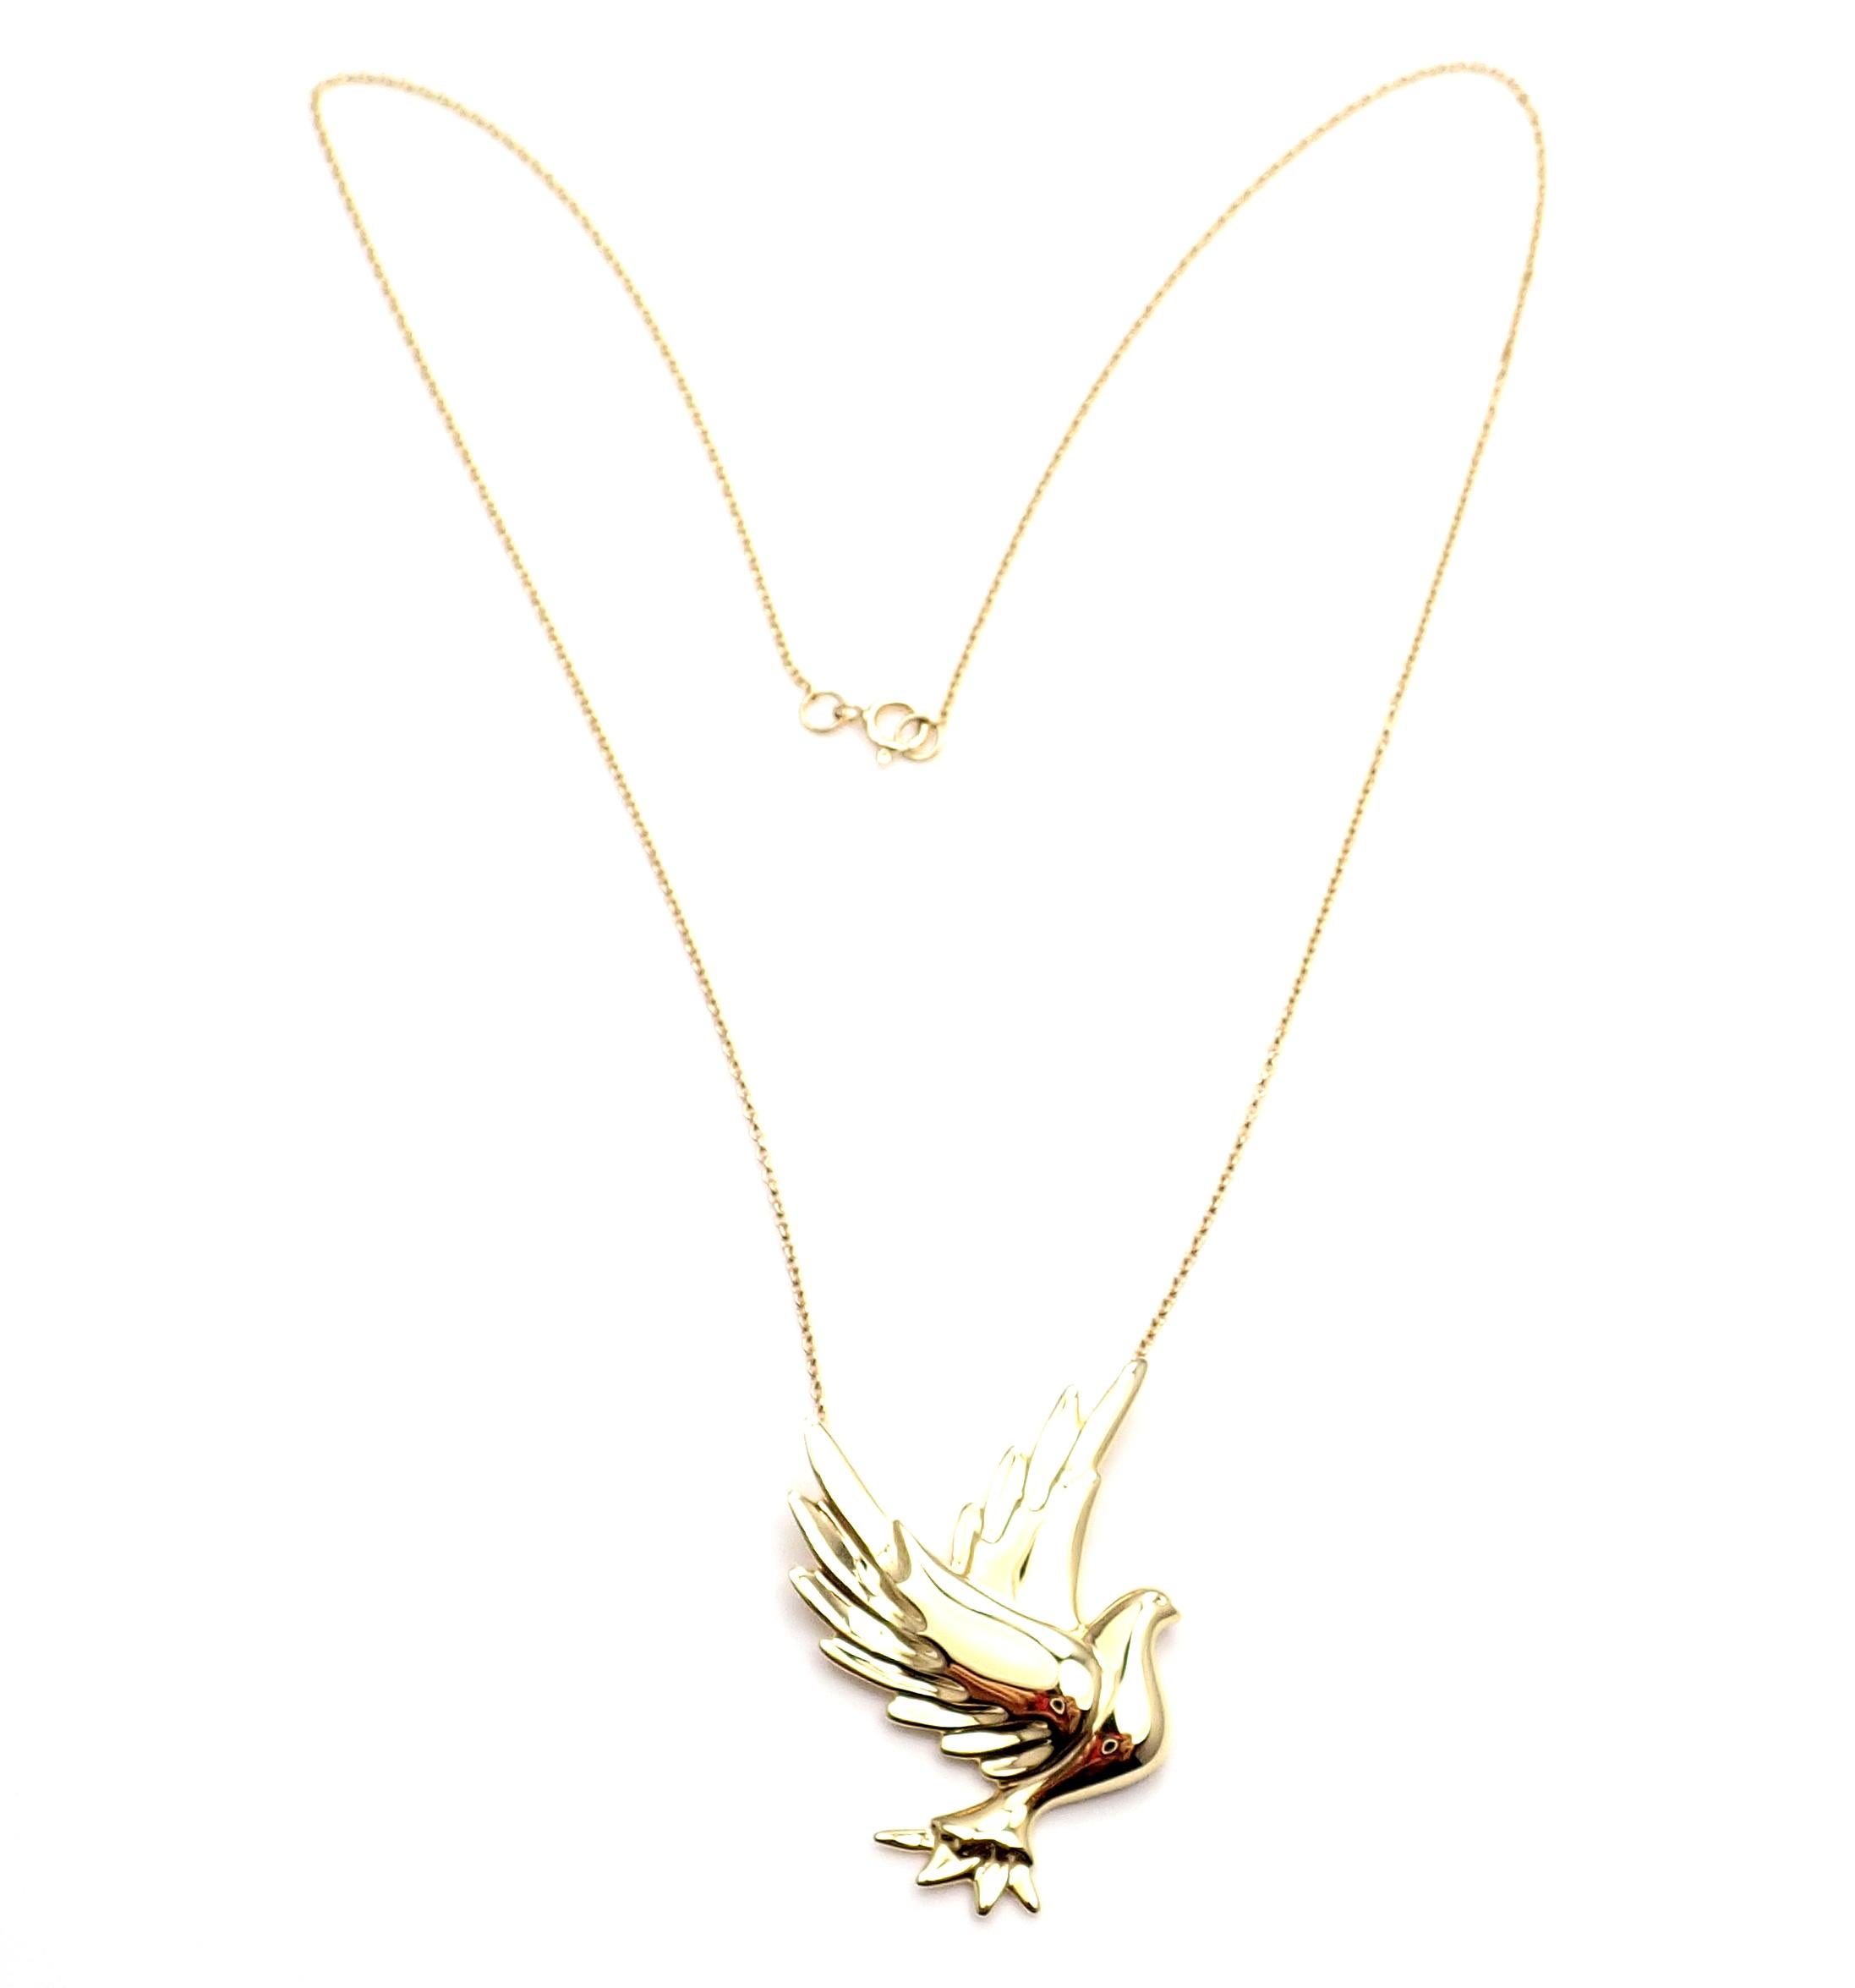 18k Yellow Gold Dove Bird Pendant Necklace by Paloma Picasso for Tiffany & Co.  
Details:  
Length: 16